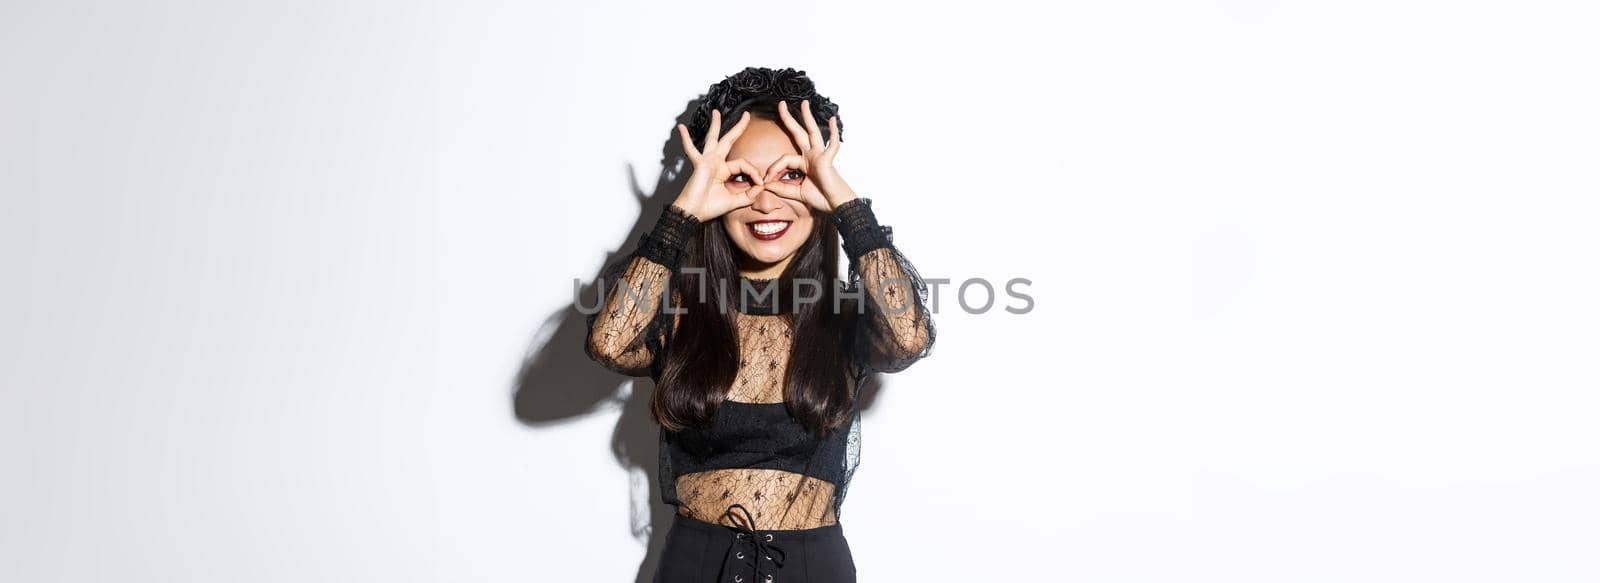 Portrait of beautiful smiling asian woman in halloween dress looking through fingers glasses at upper left corner, standing over white background.